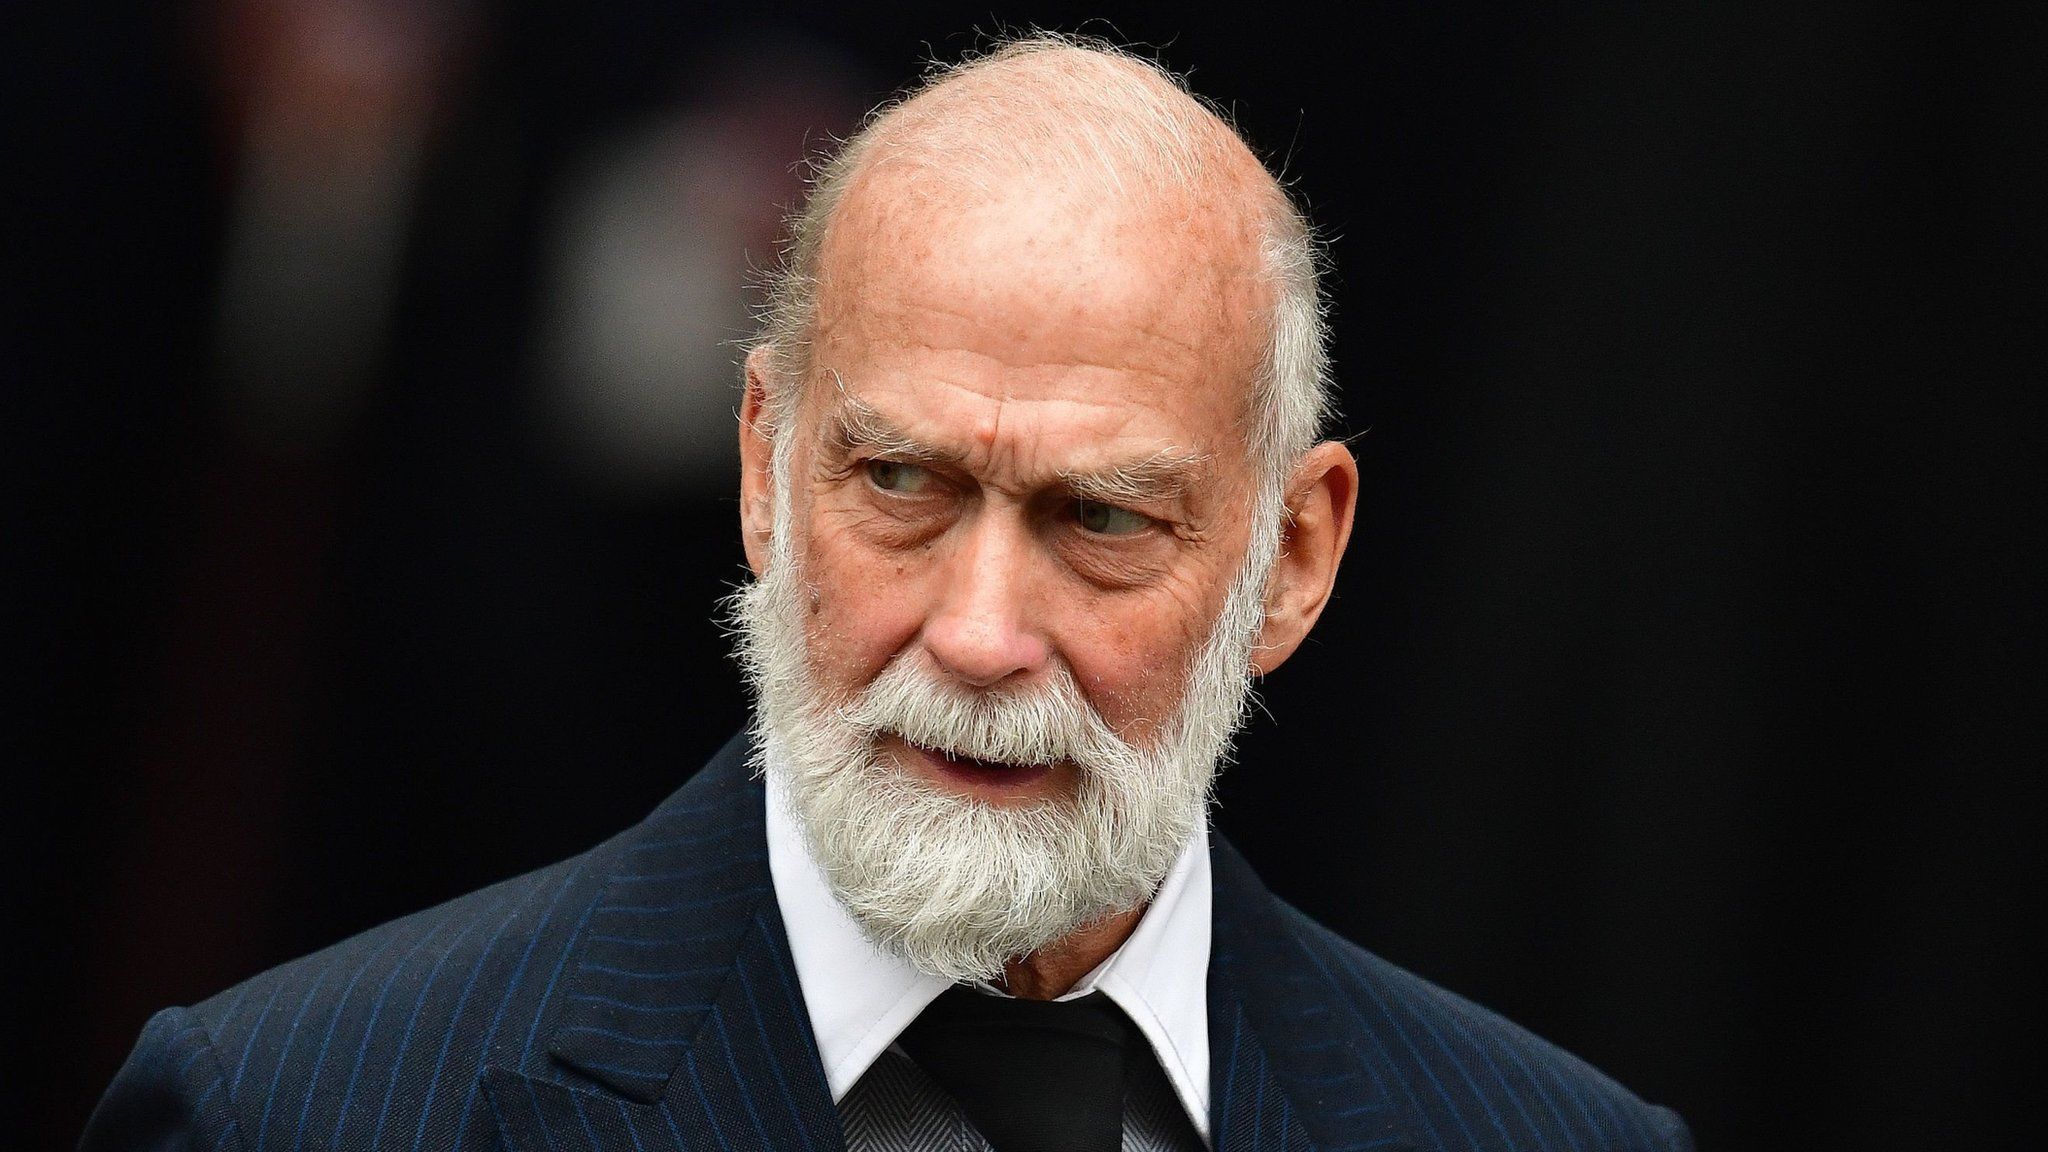 Prince Michael of Kent in 2017